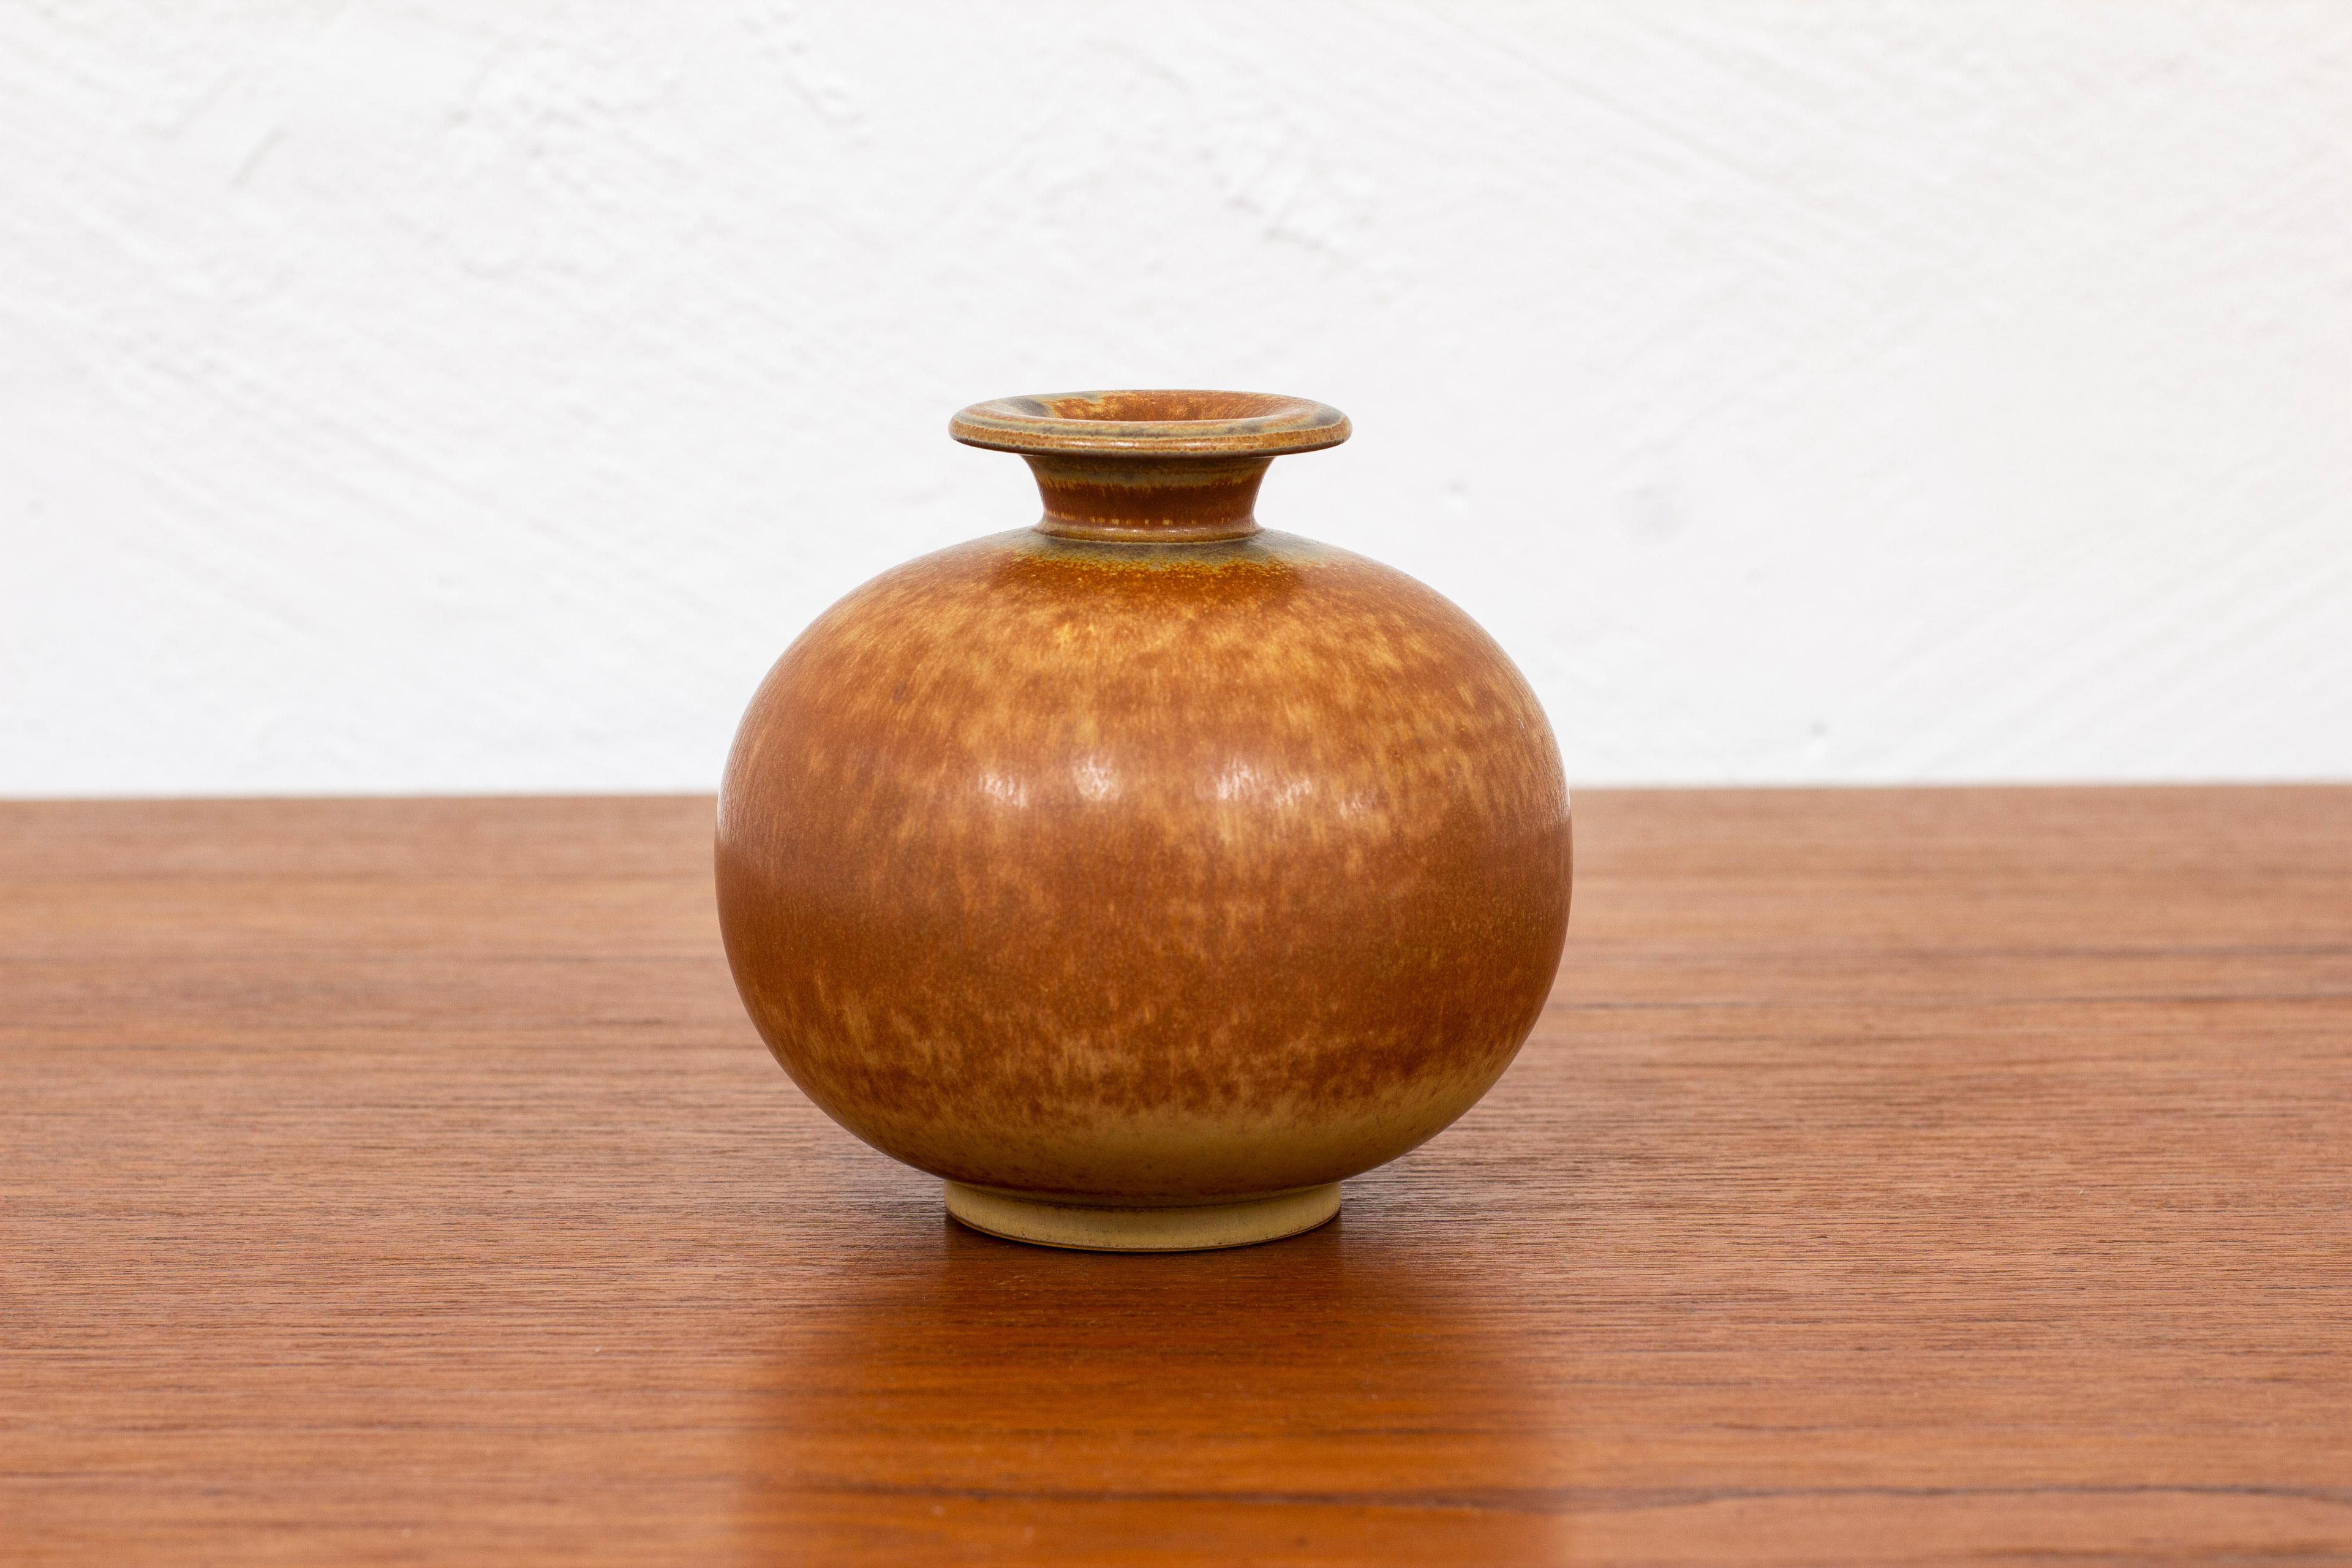 Stoneware vase designed by Gunnar Nylund. Hand made at Rörstrand in the 1940s. Glaze with burnt brown tones. Very good vintage condition with light wear and patina.

